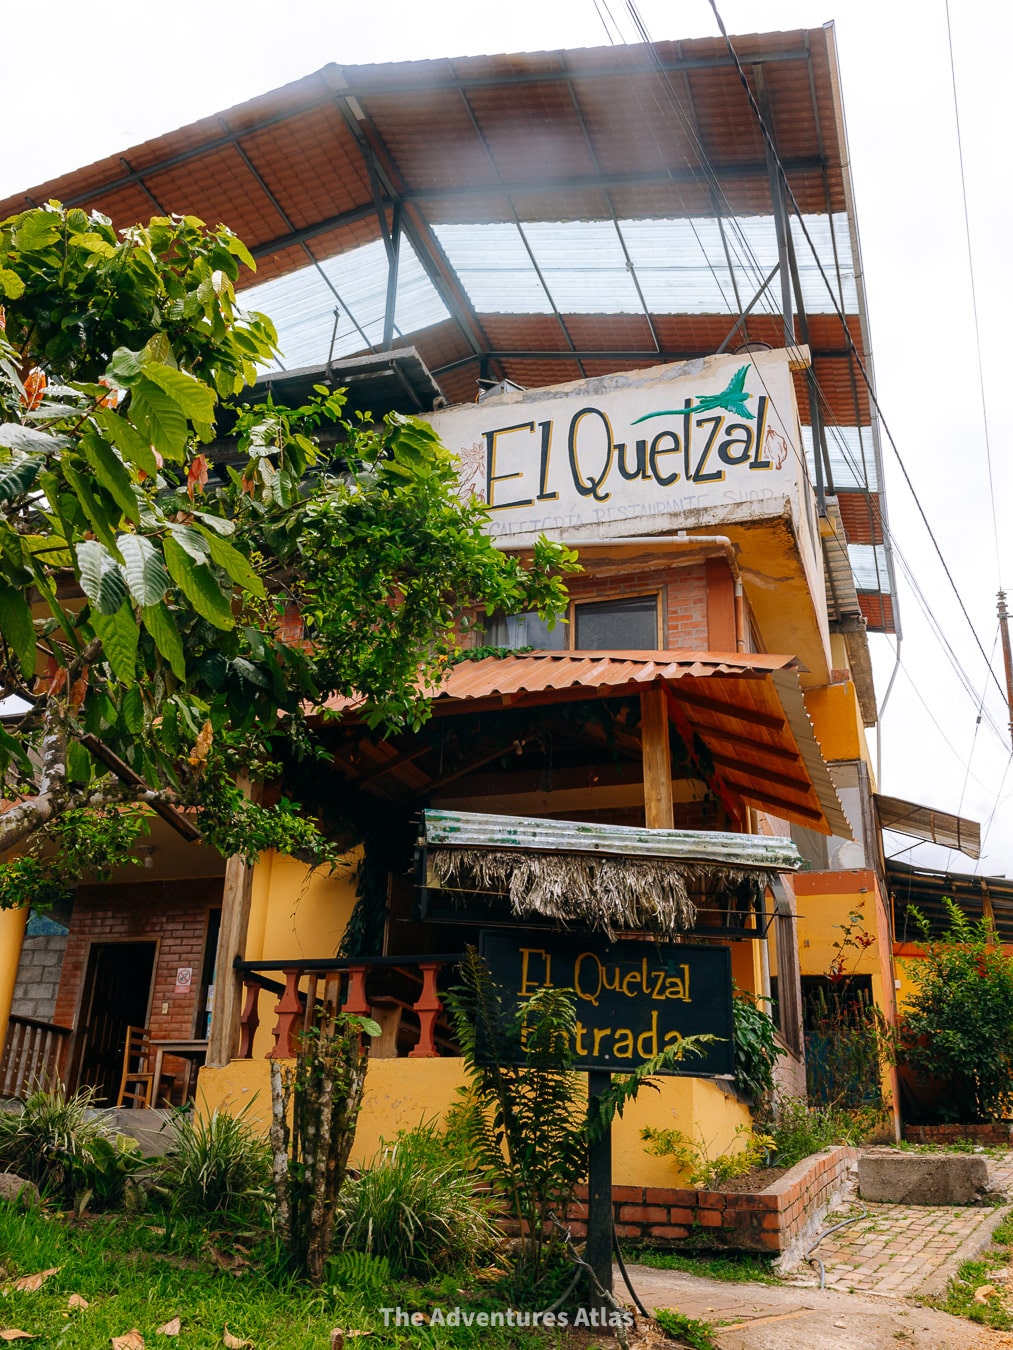 El Quetzal is one of the best places to take a chocolate tour in Ecuador